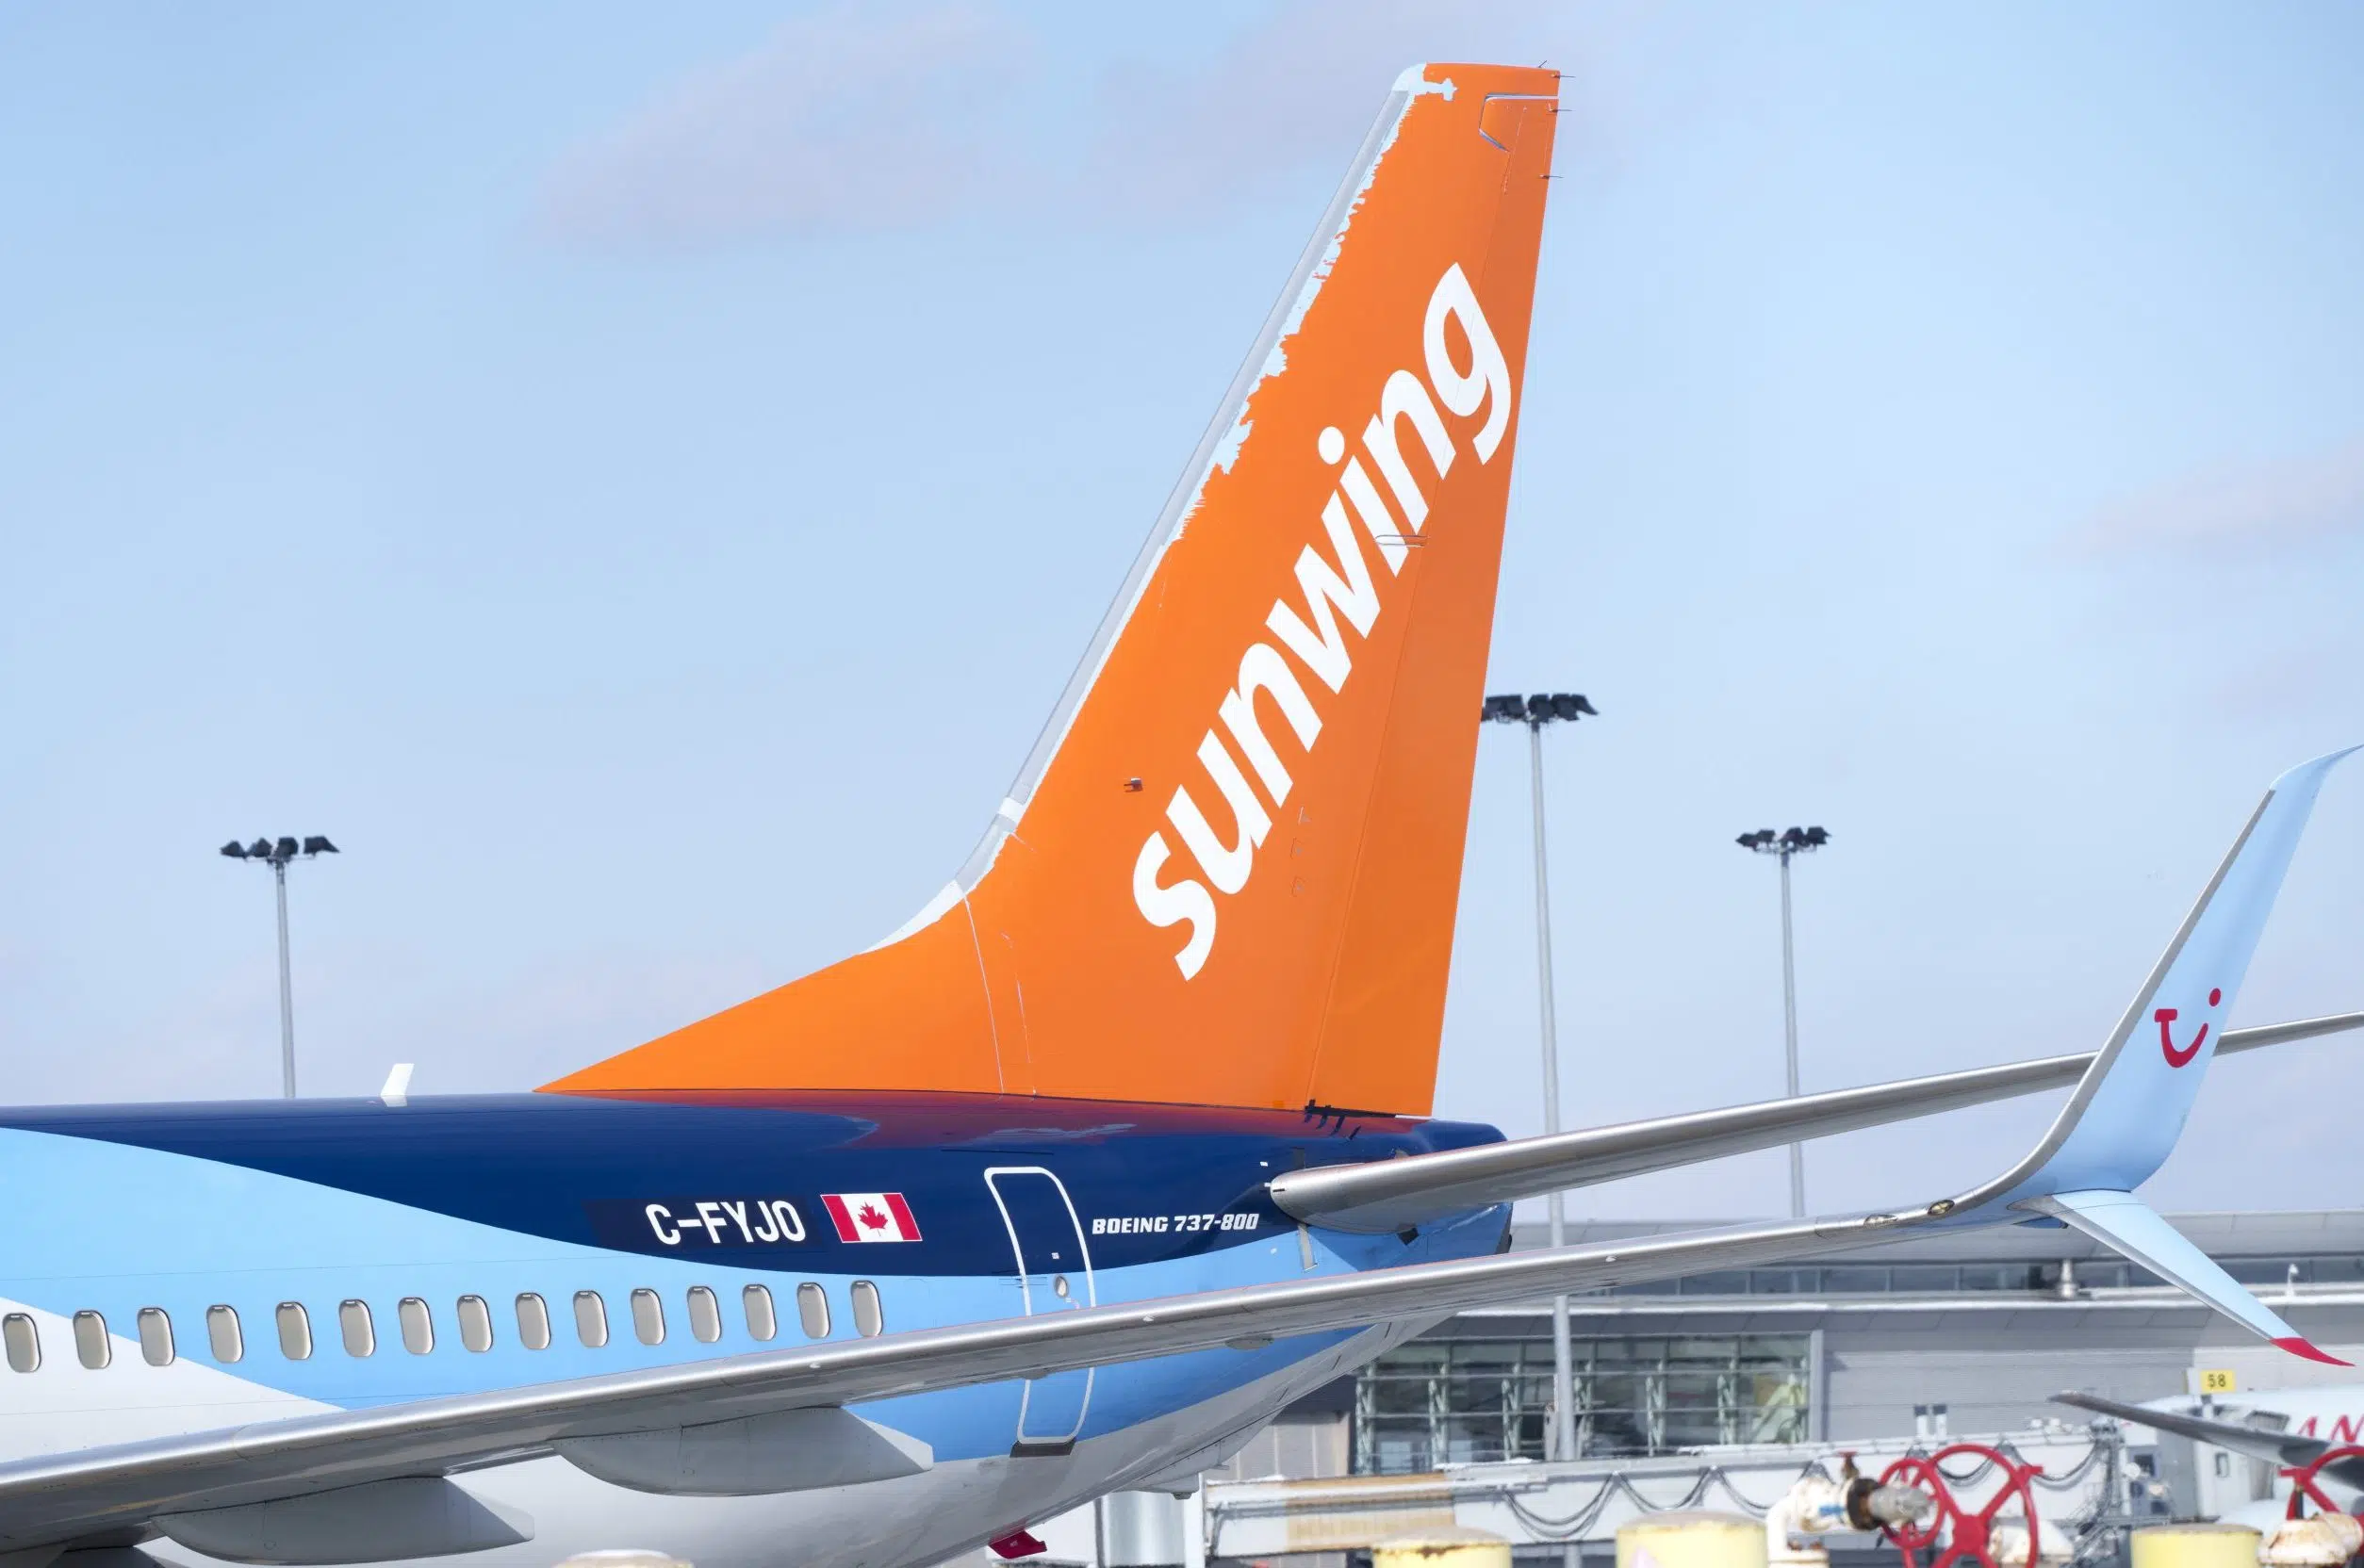 Sunwing cancellations leave Sask. passenger feeling less likely to fly in future